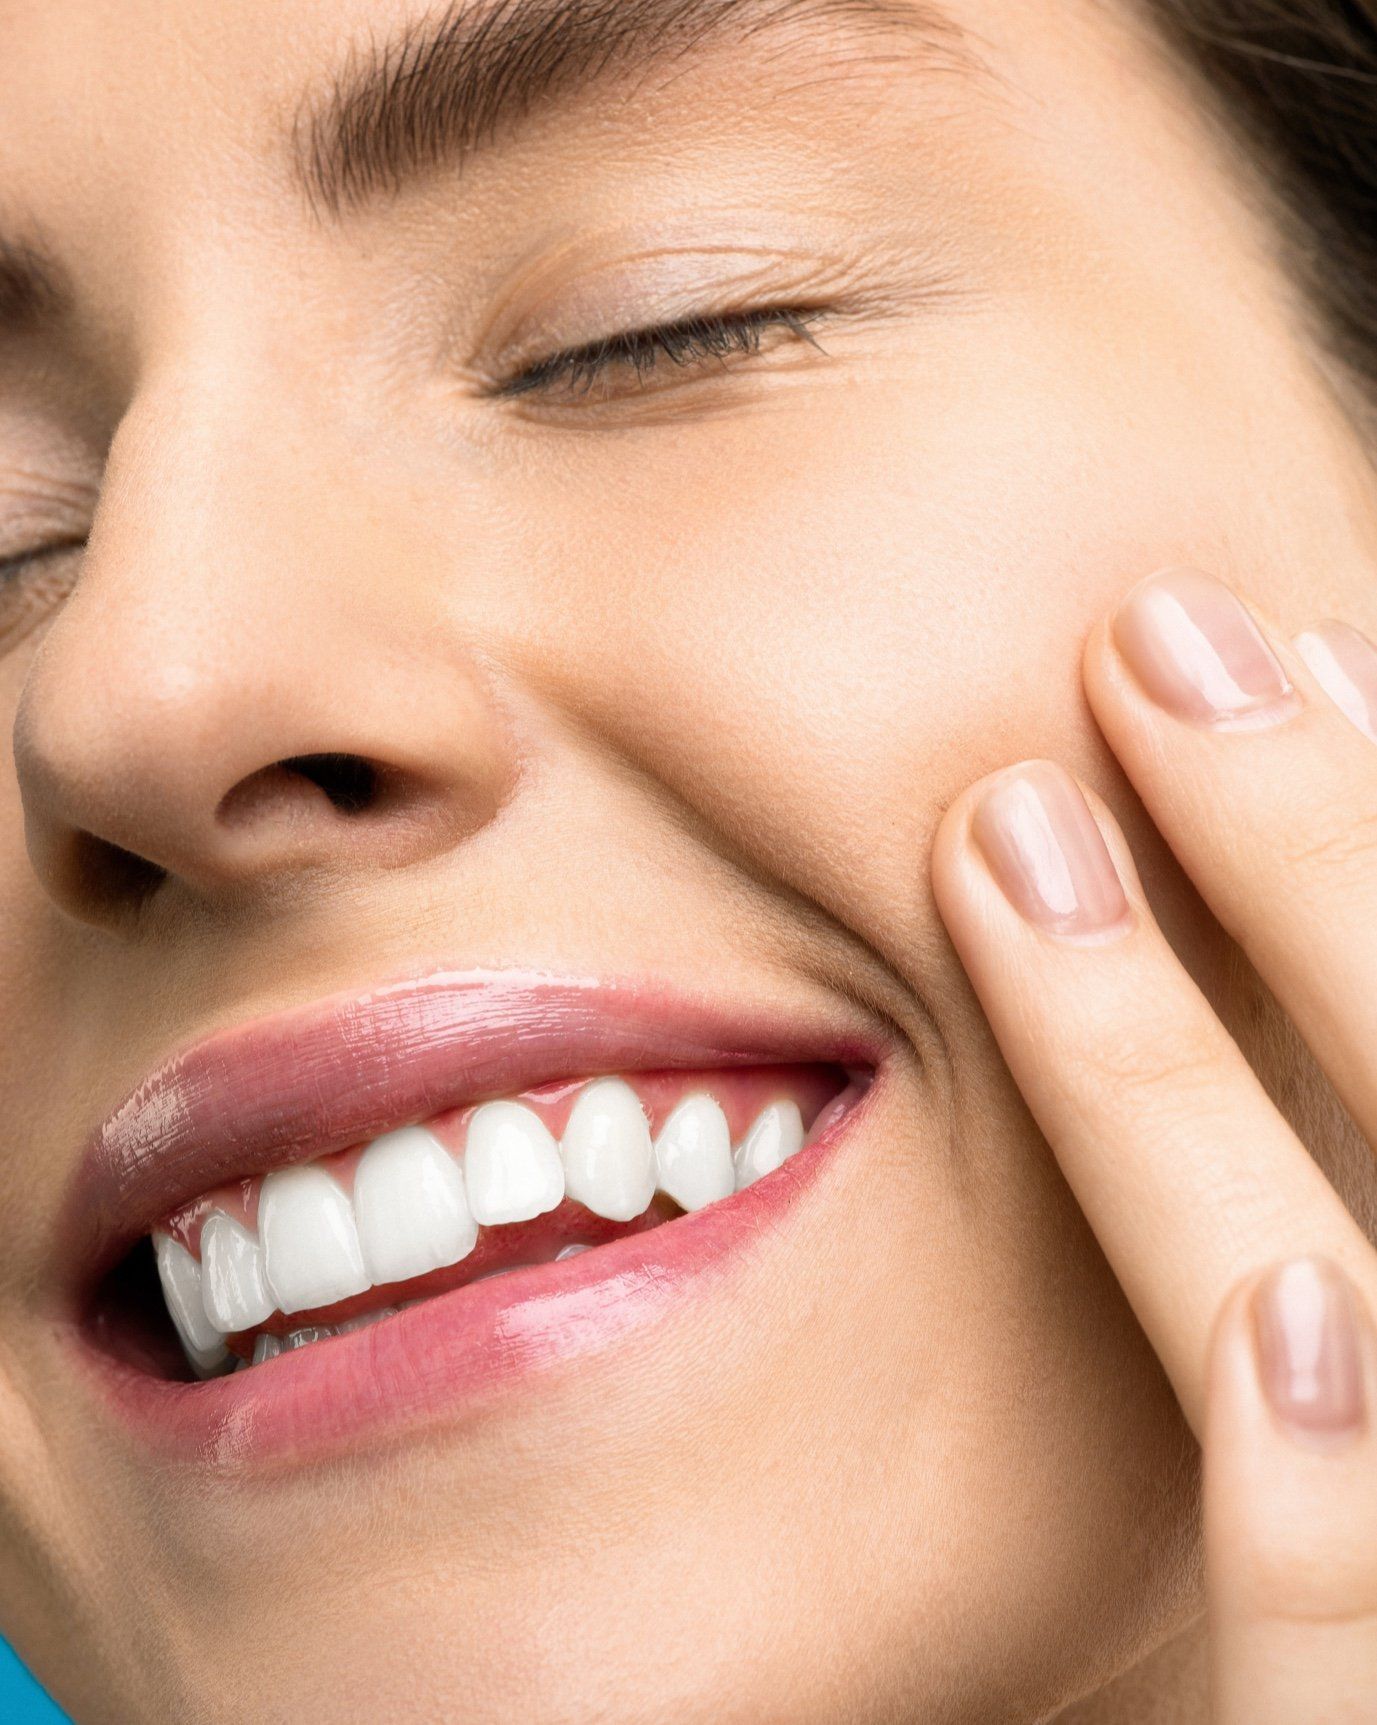 Customize Your Veneers for Your Face Based on These 3 Factors